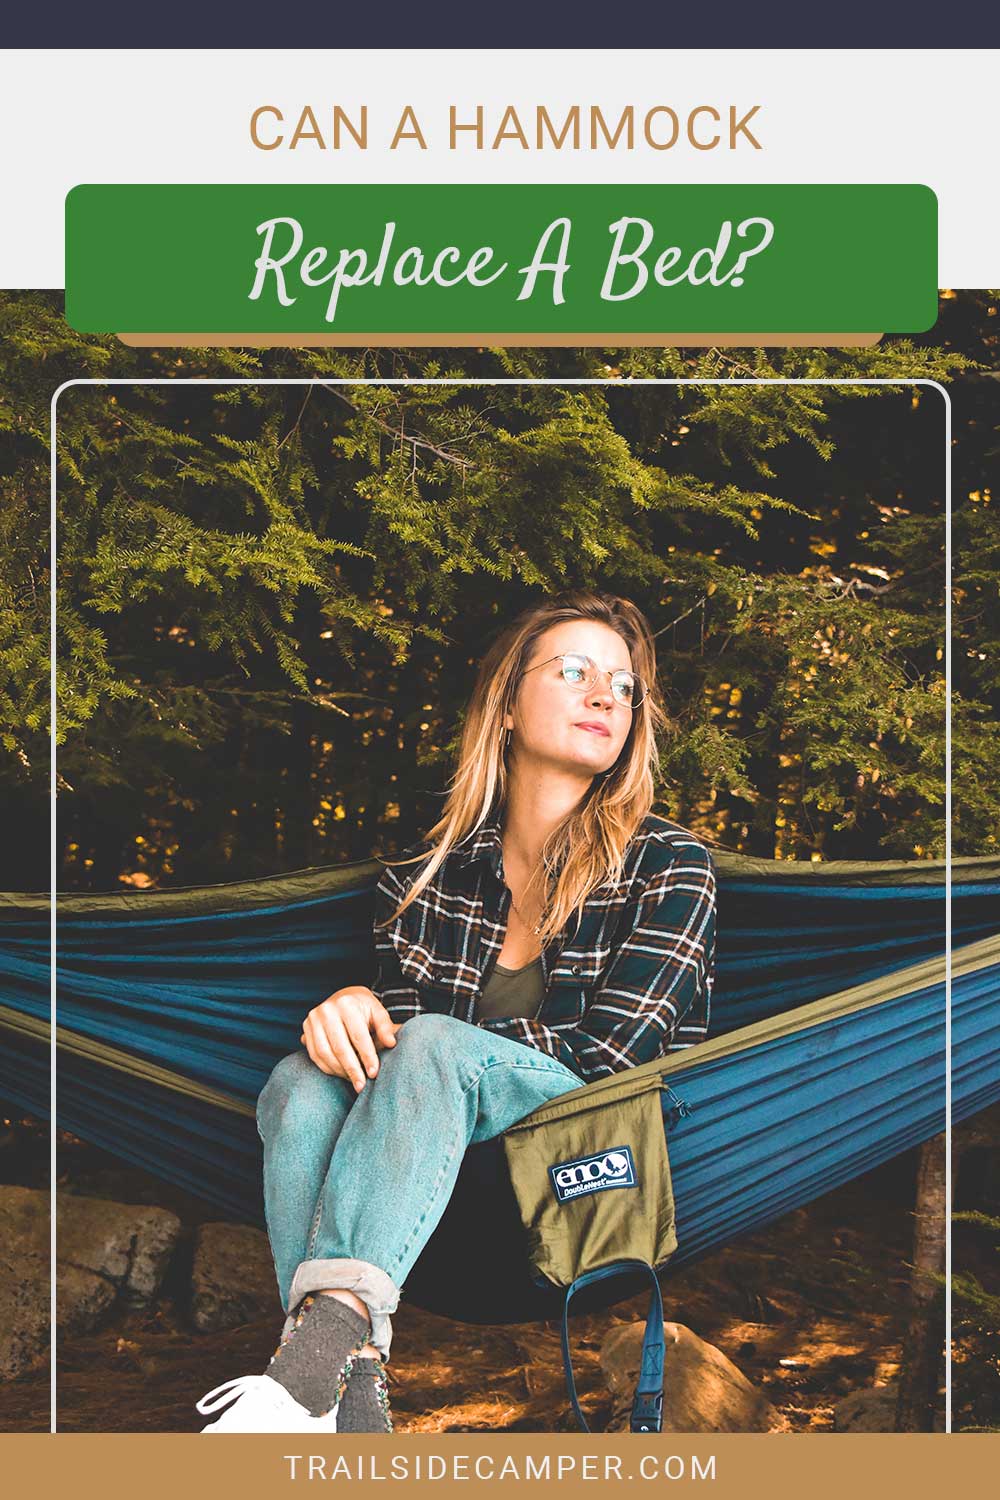 Can A Hammock Replace A Bed?